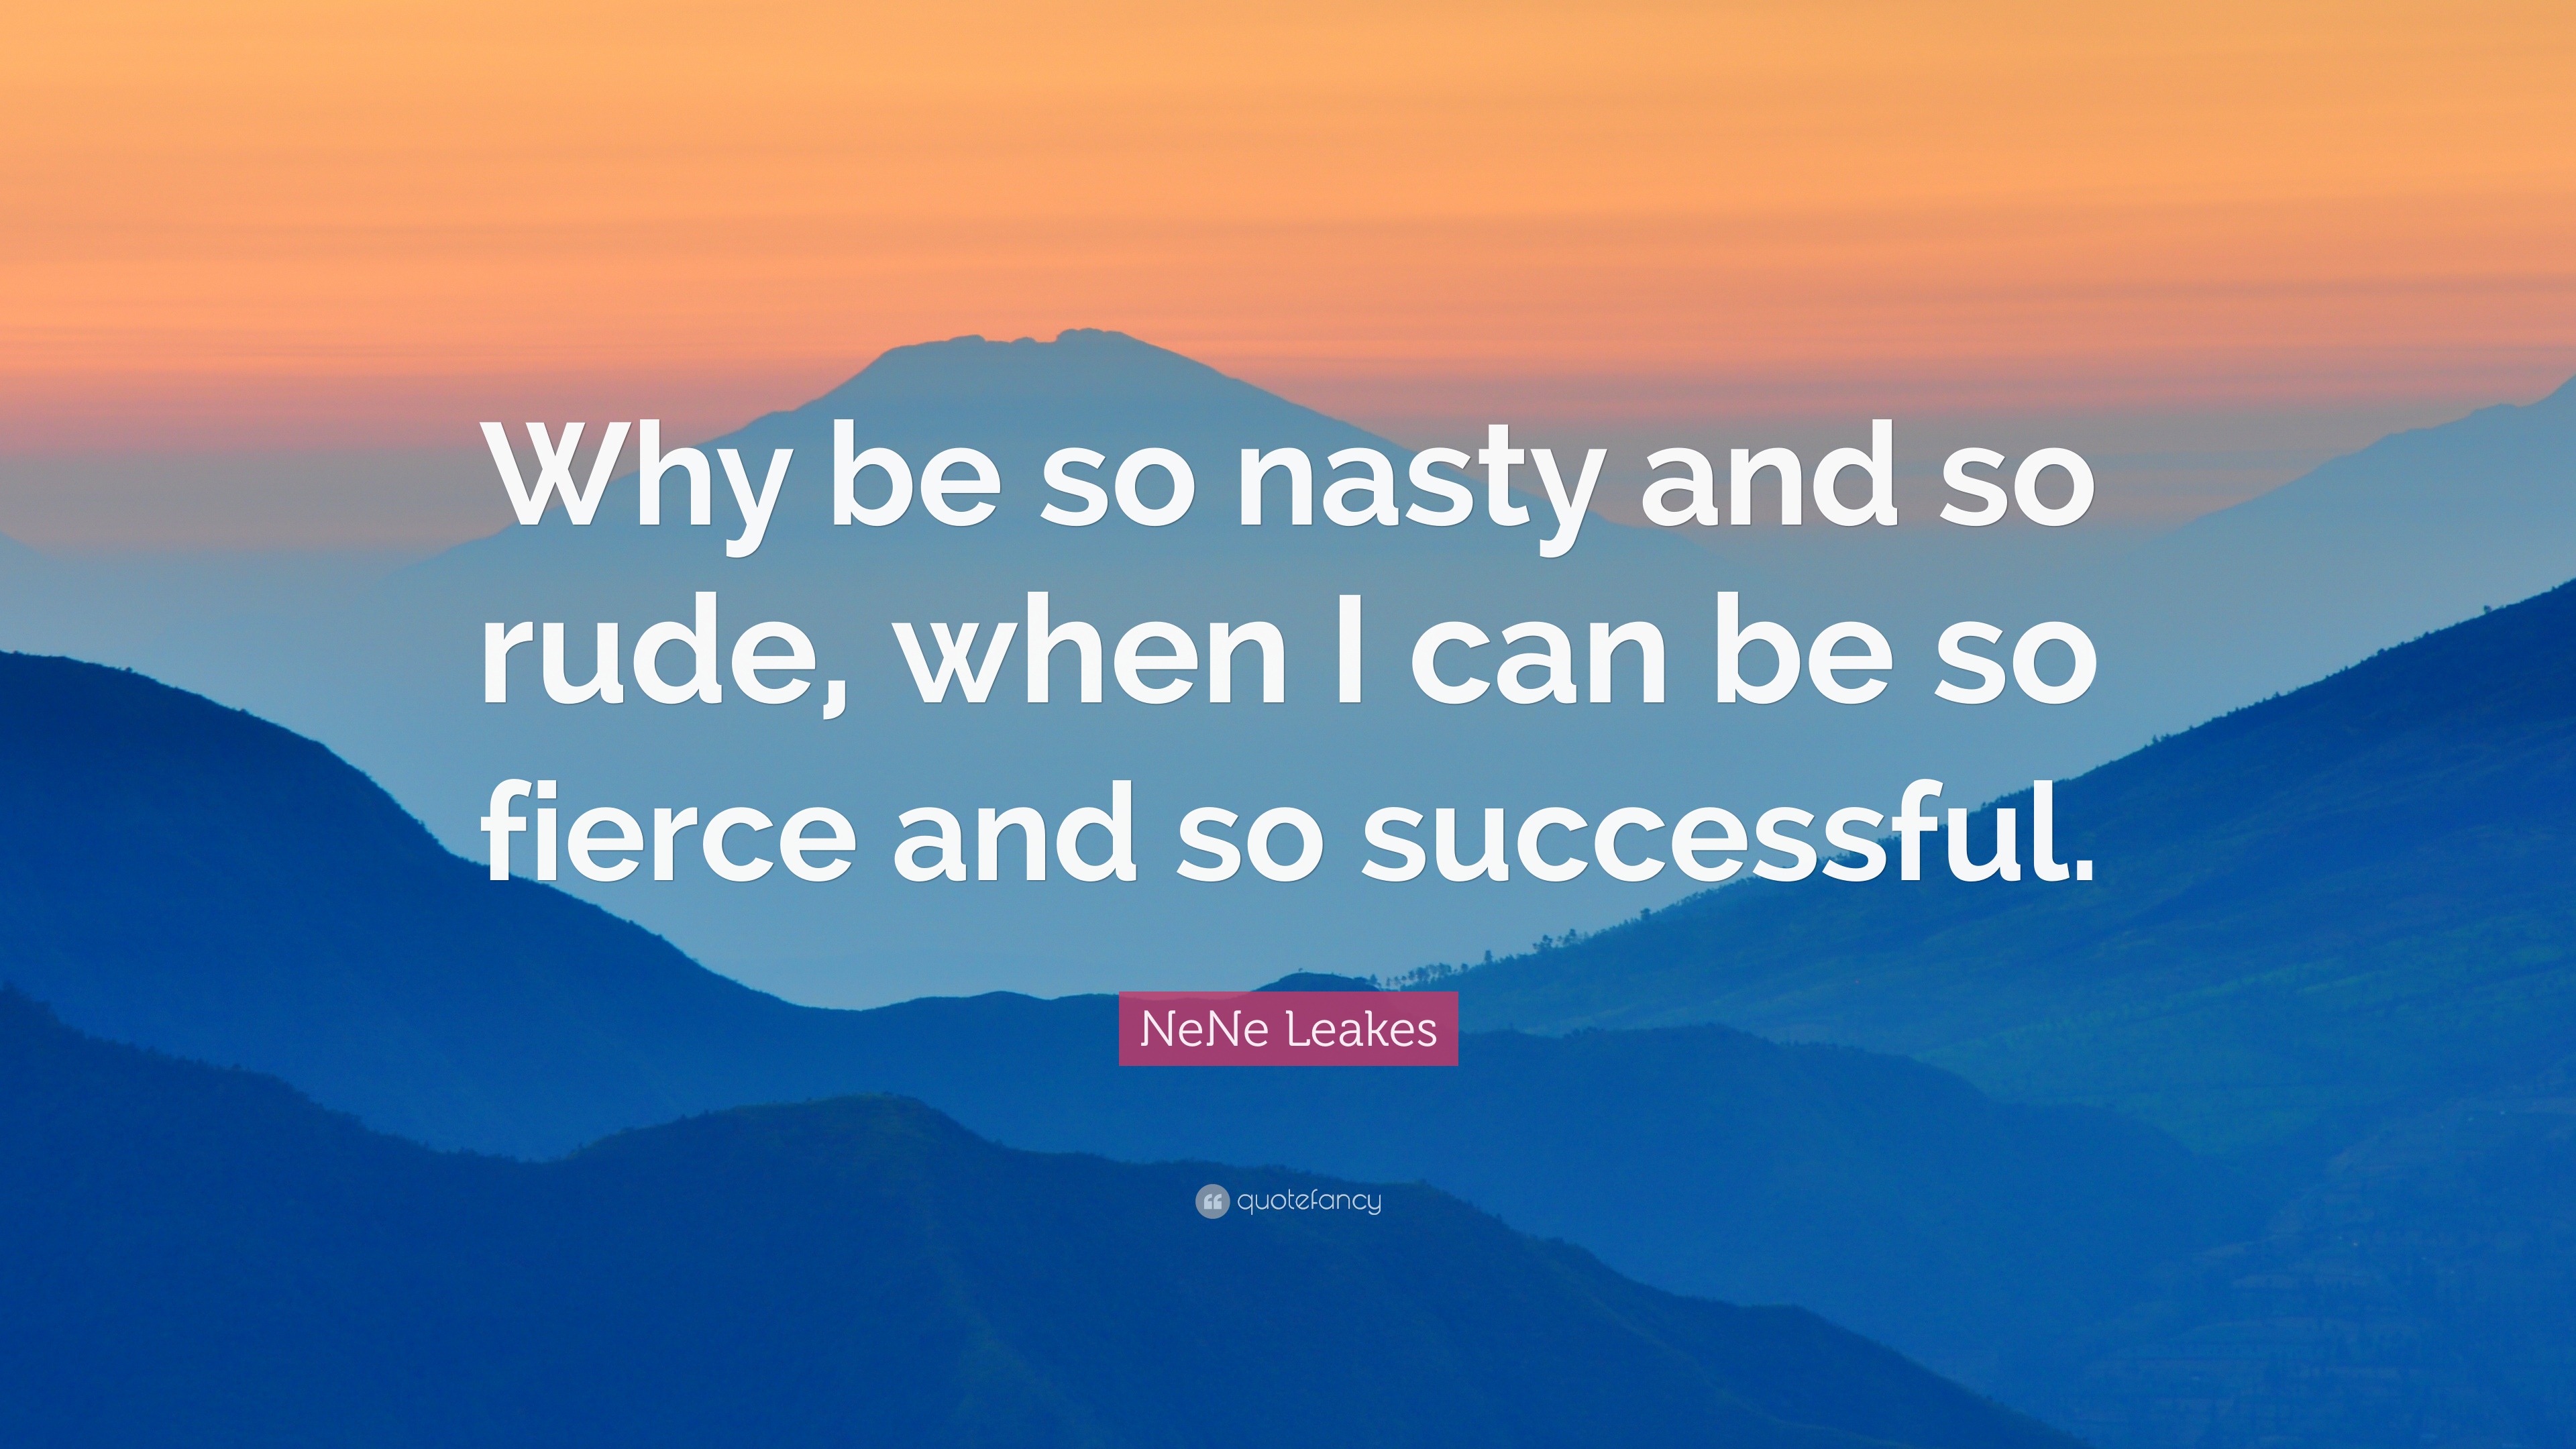 NeNe Leakes Quote: “Why be so nasty and so rude, when I can